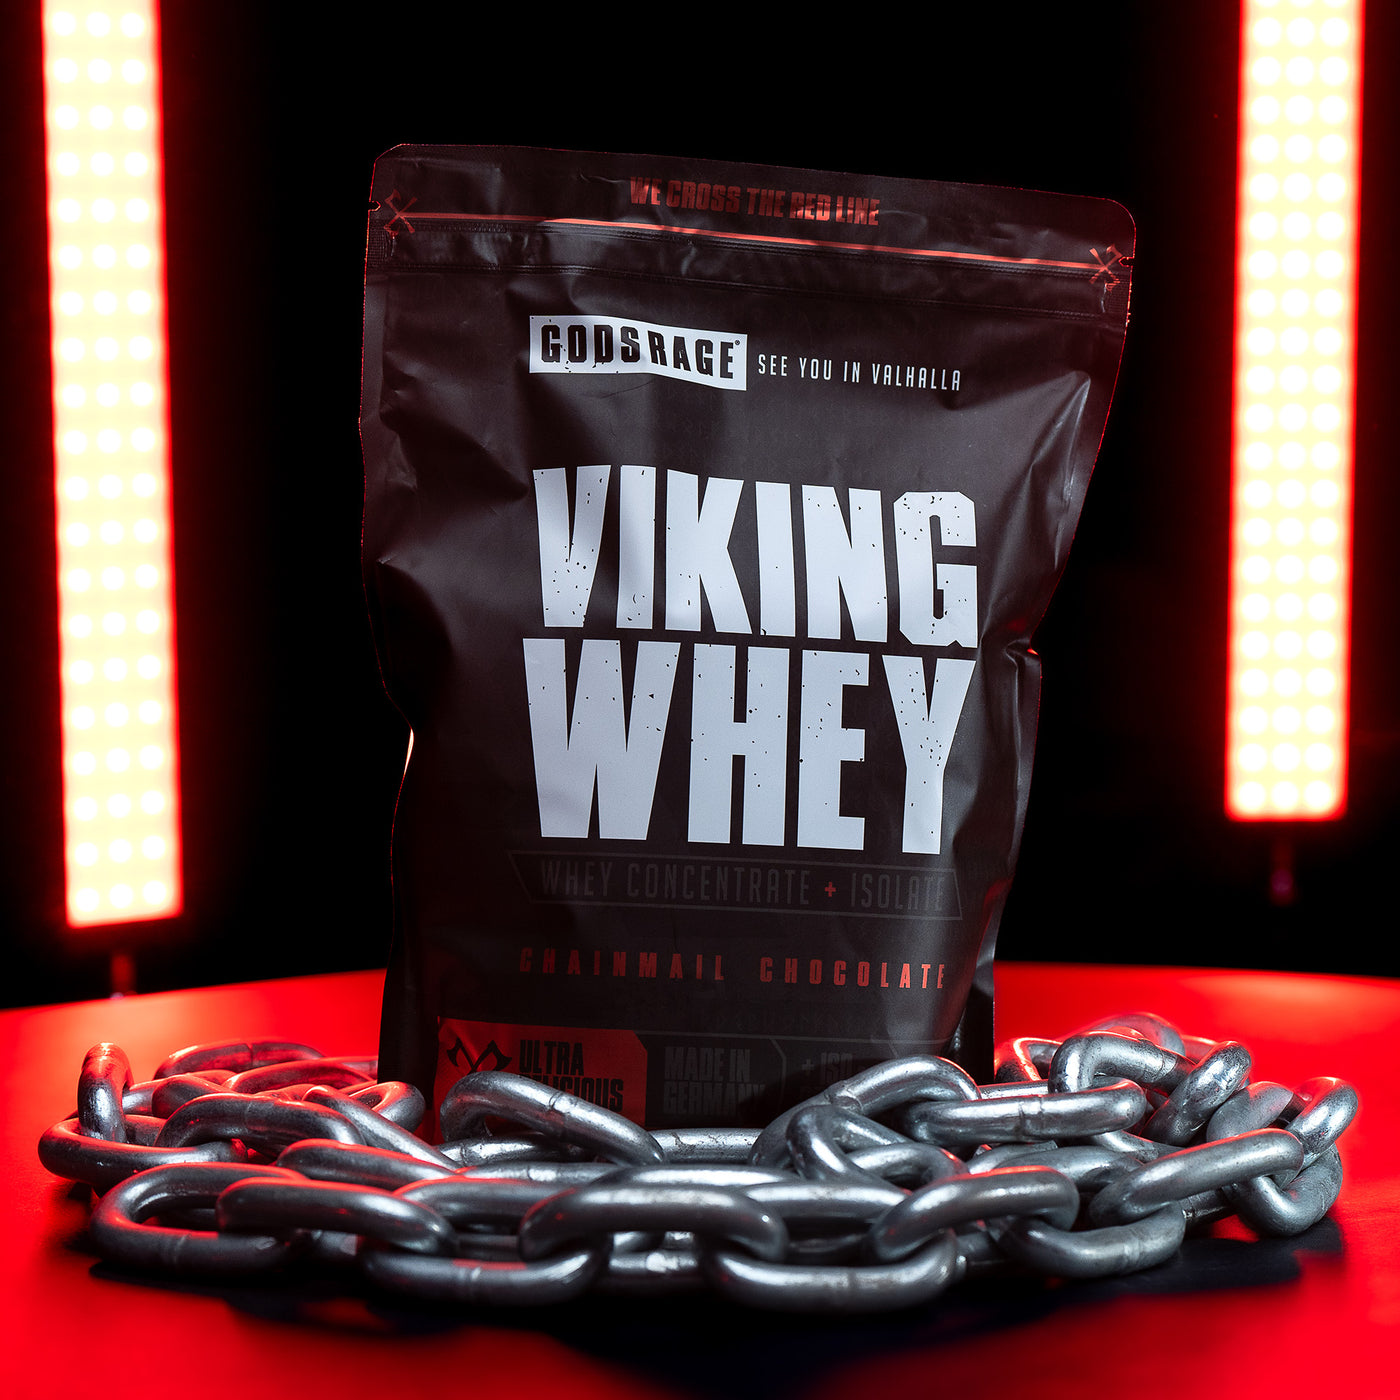 Viking Whey · Conquerer Cappuccino · 1000g